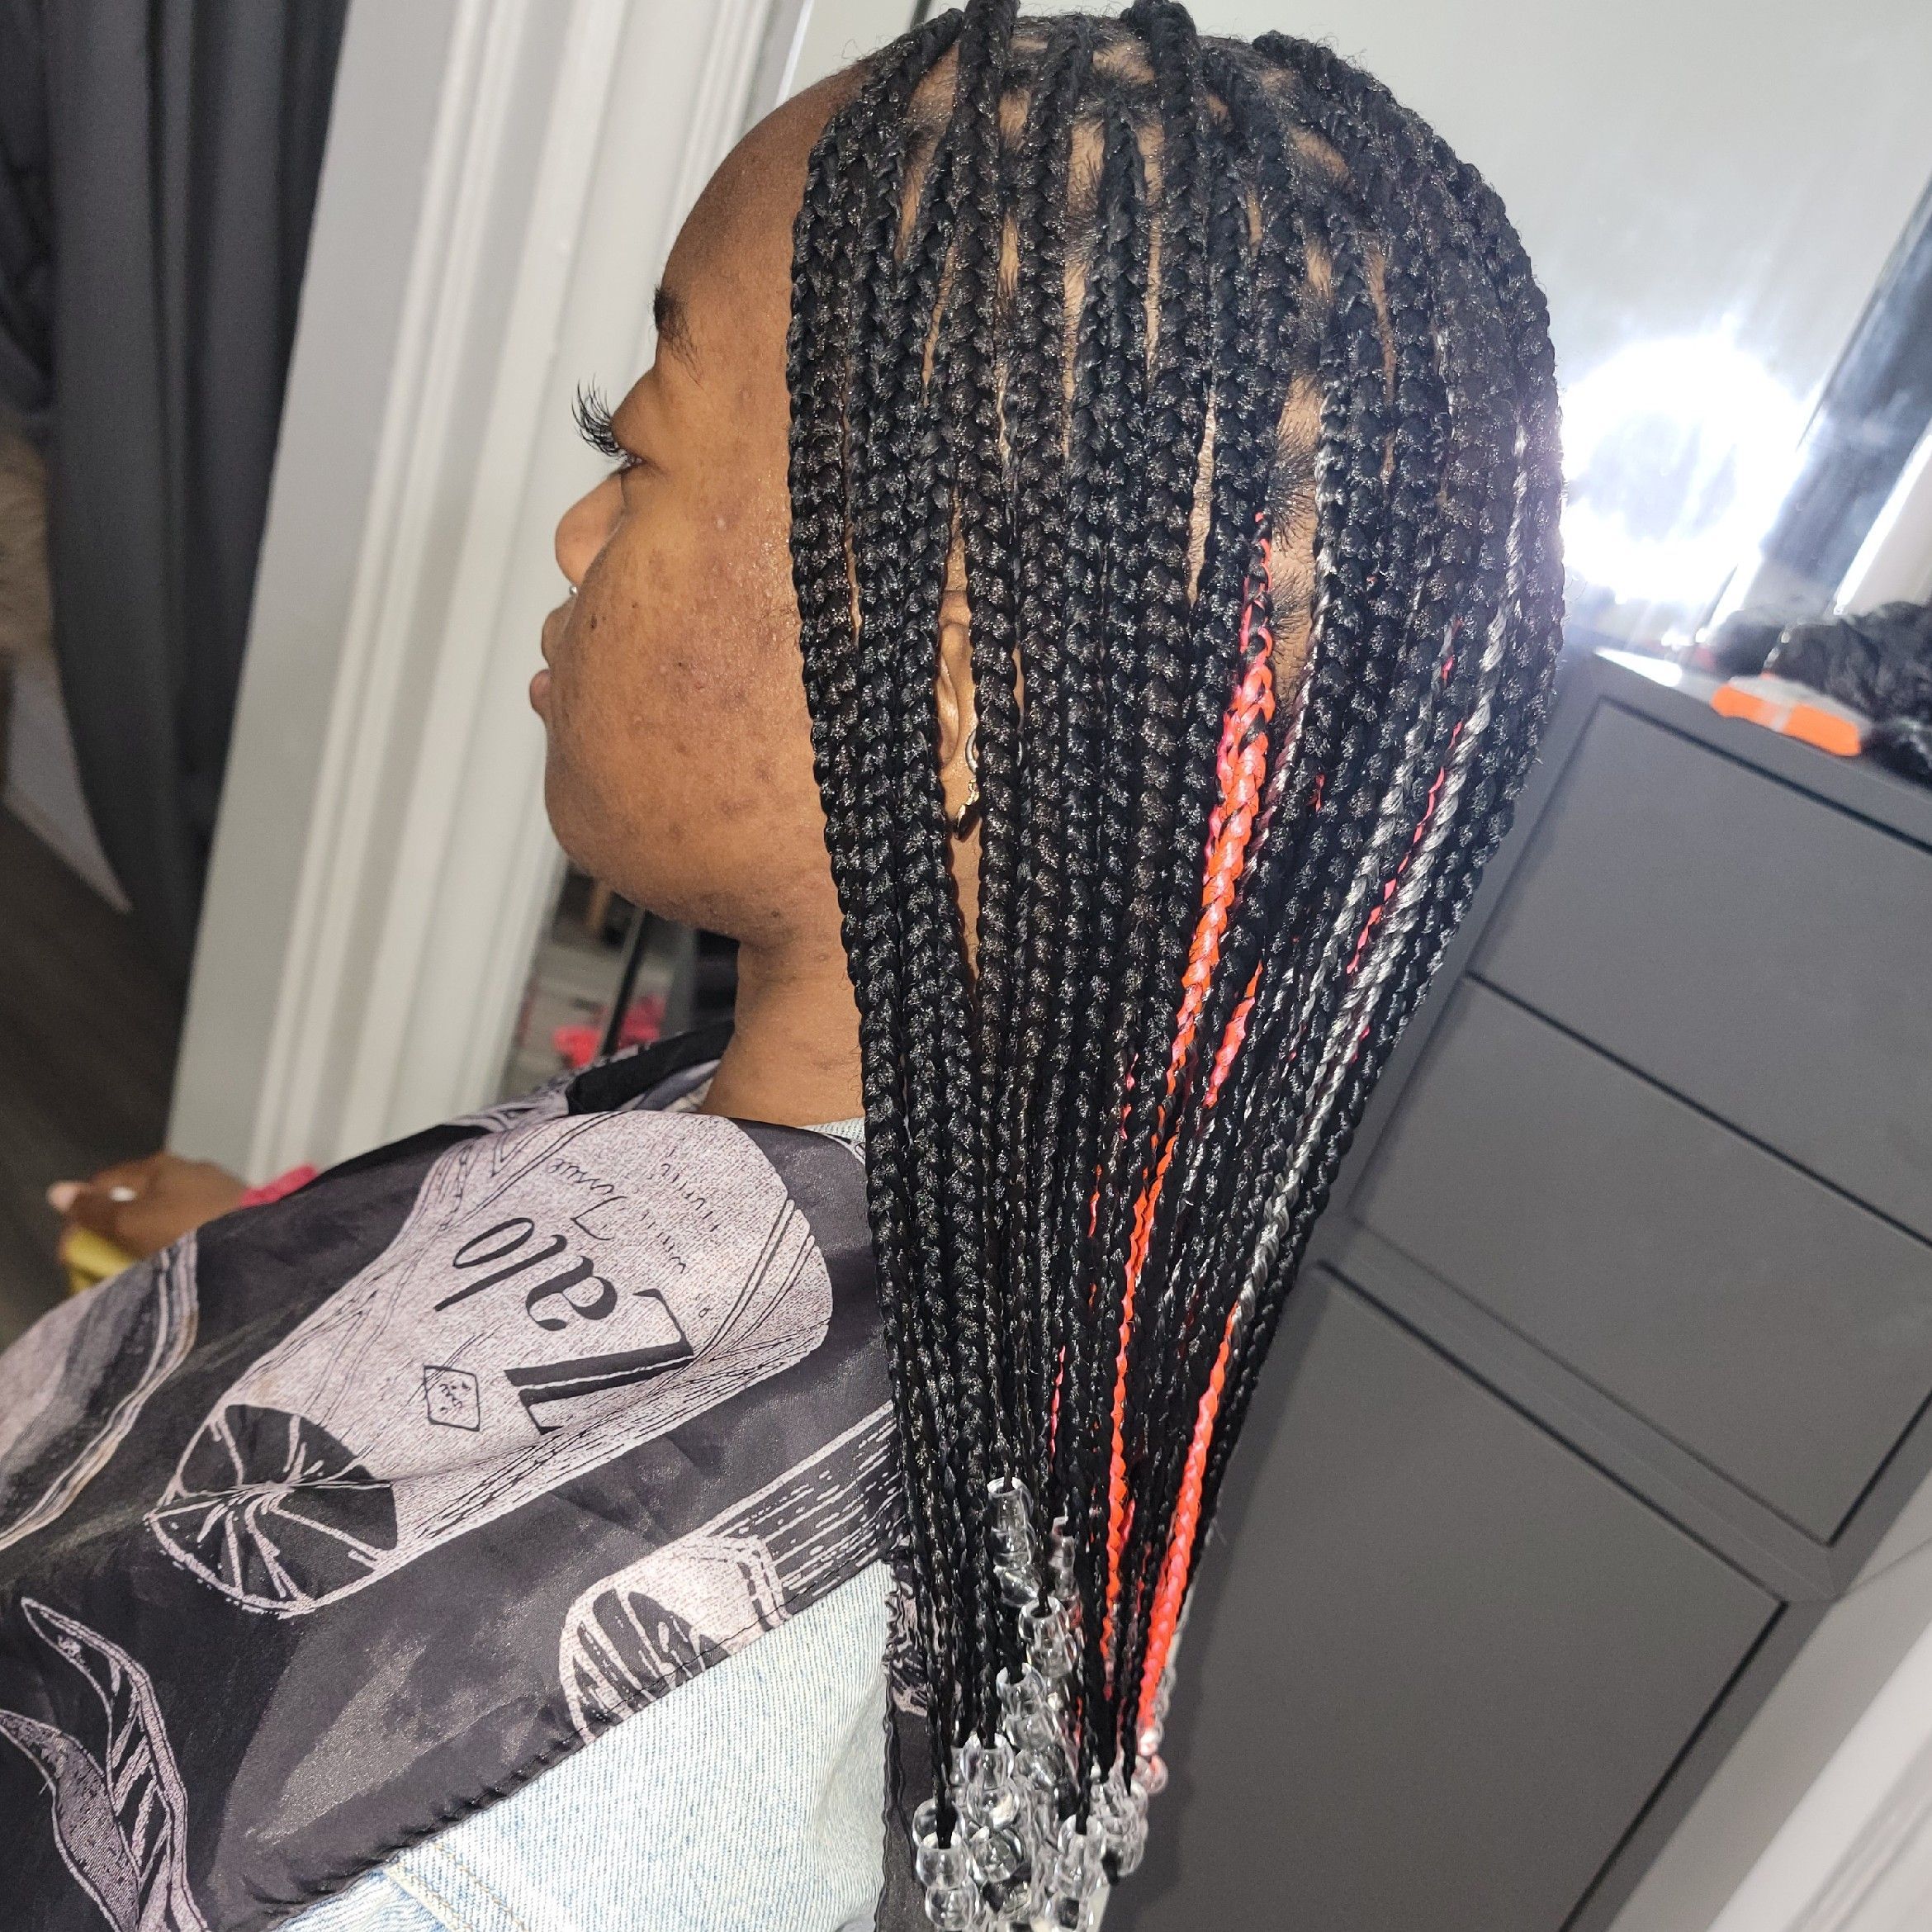 Bob Knotless with Beads, Md, Hair Included. portfolio